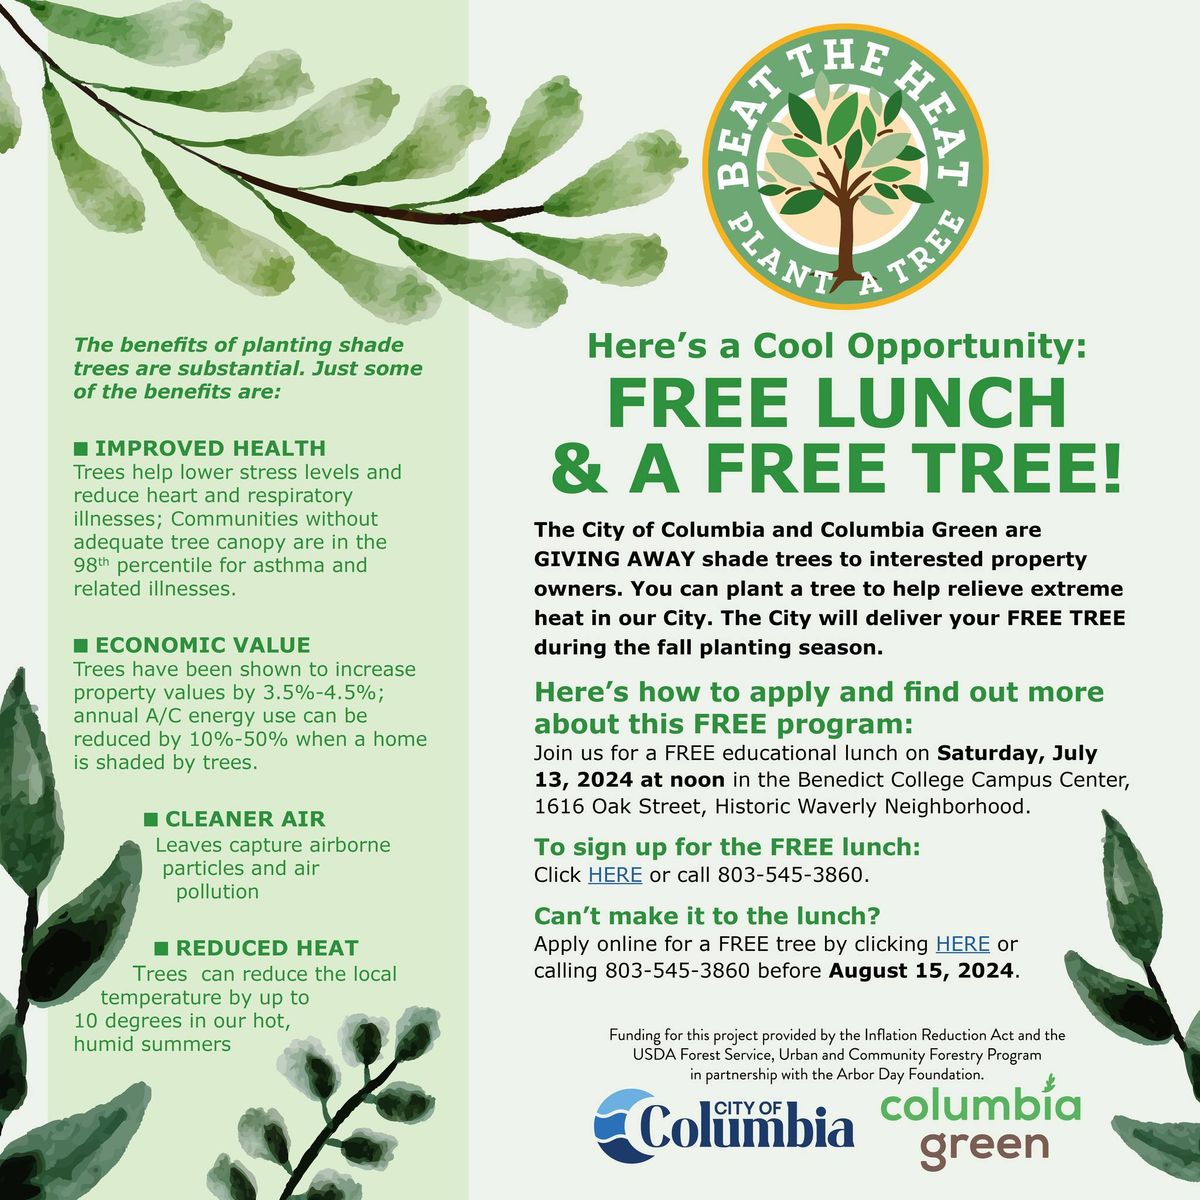 Beat the Heat: Free Lunch & A Free Tree!